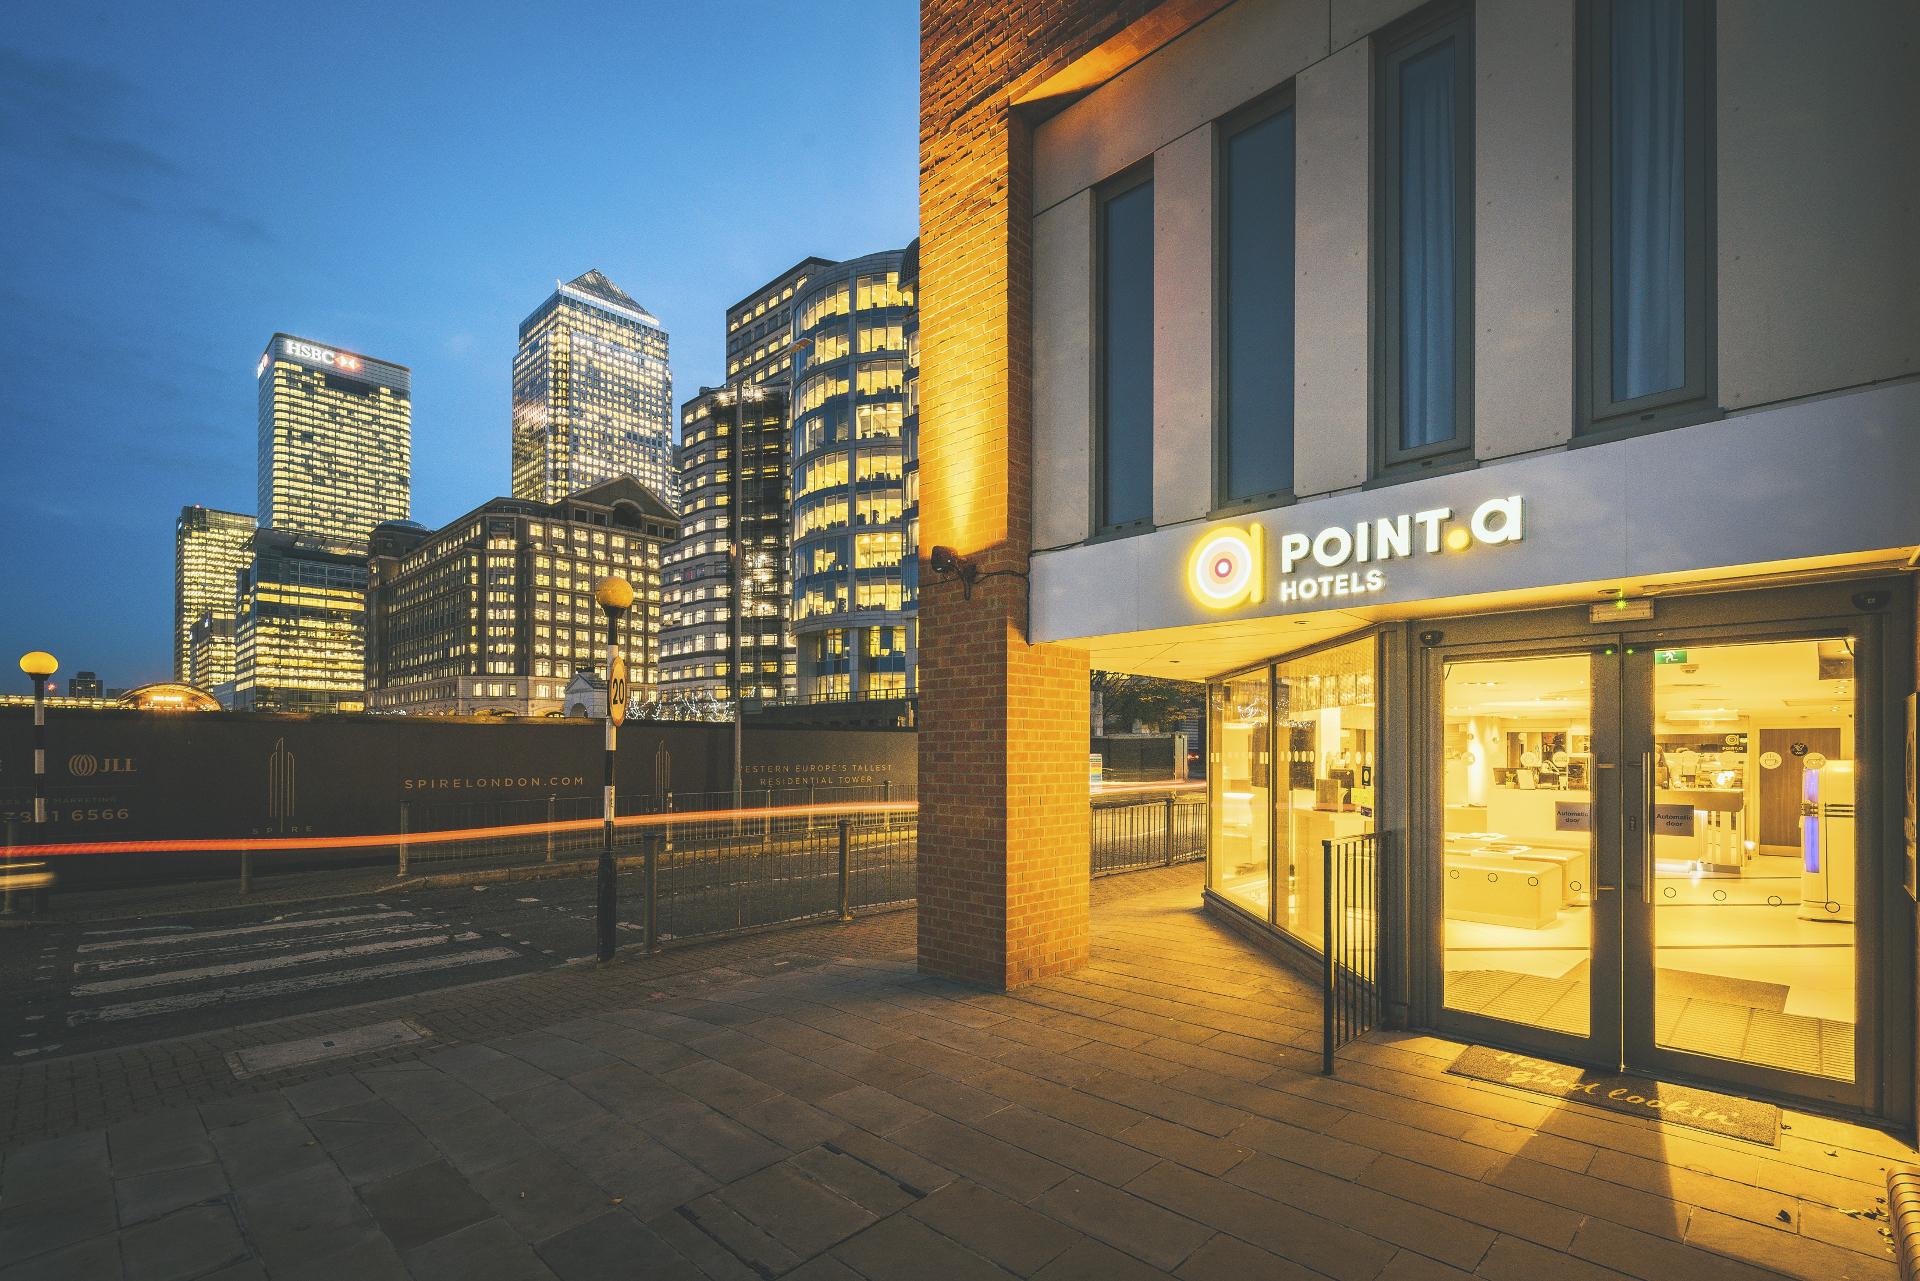 Point A Hotels set for acquisitive growth after Tristan Capital Partners takeover